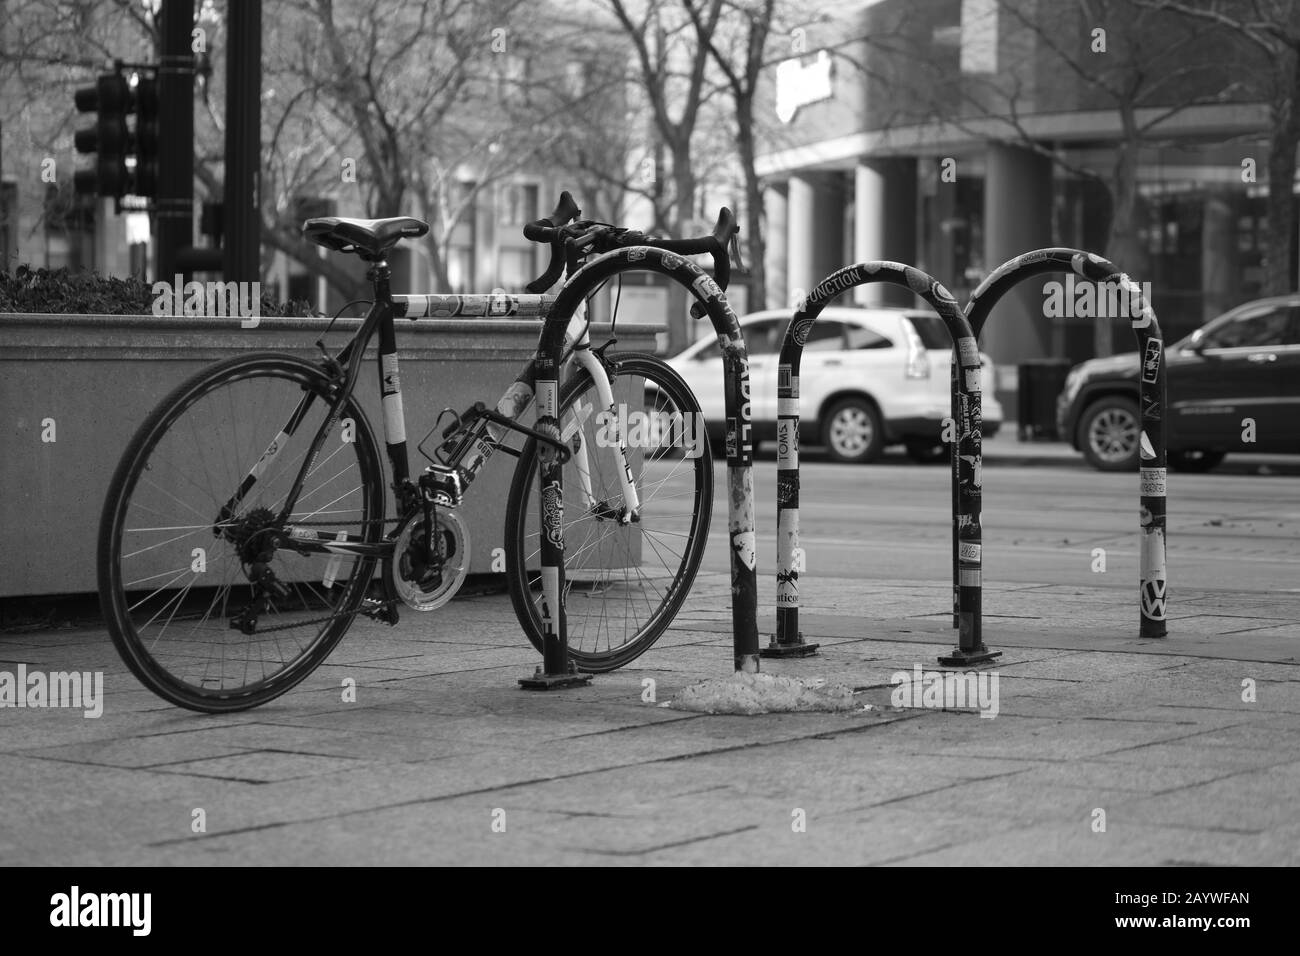 Bicycle secured on a bike rack in the city. Stock Photo